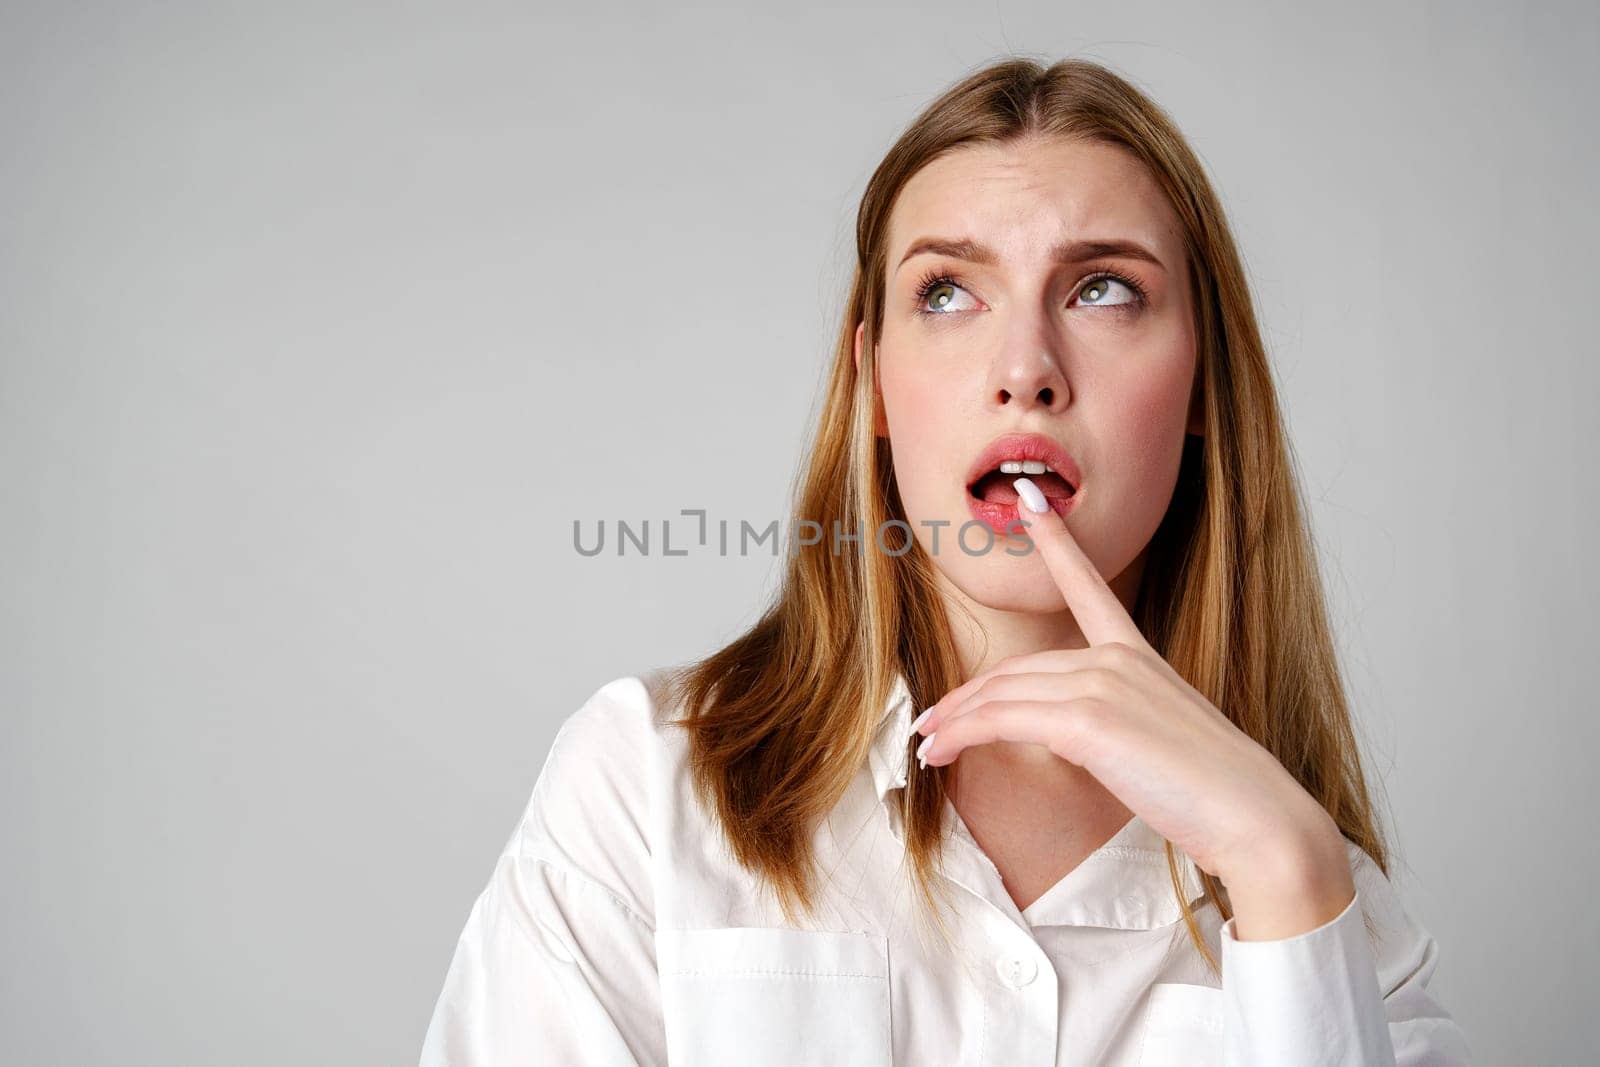 Young Woman in White Shirt Holding Finger to Lips